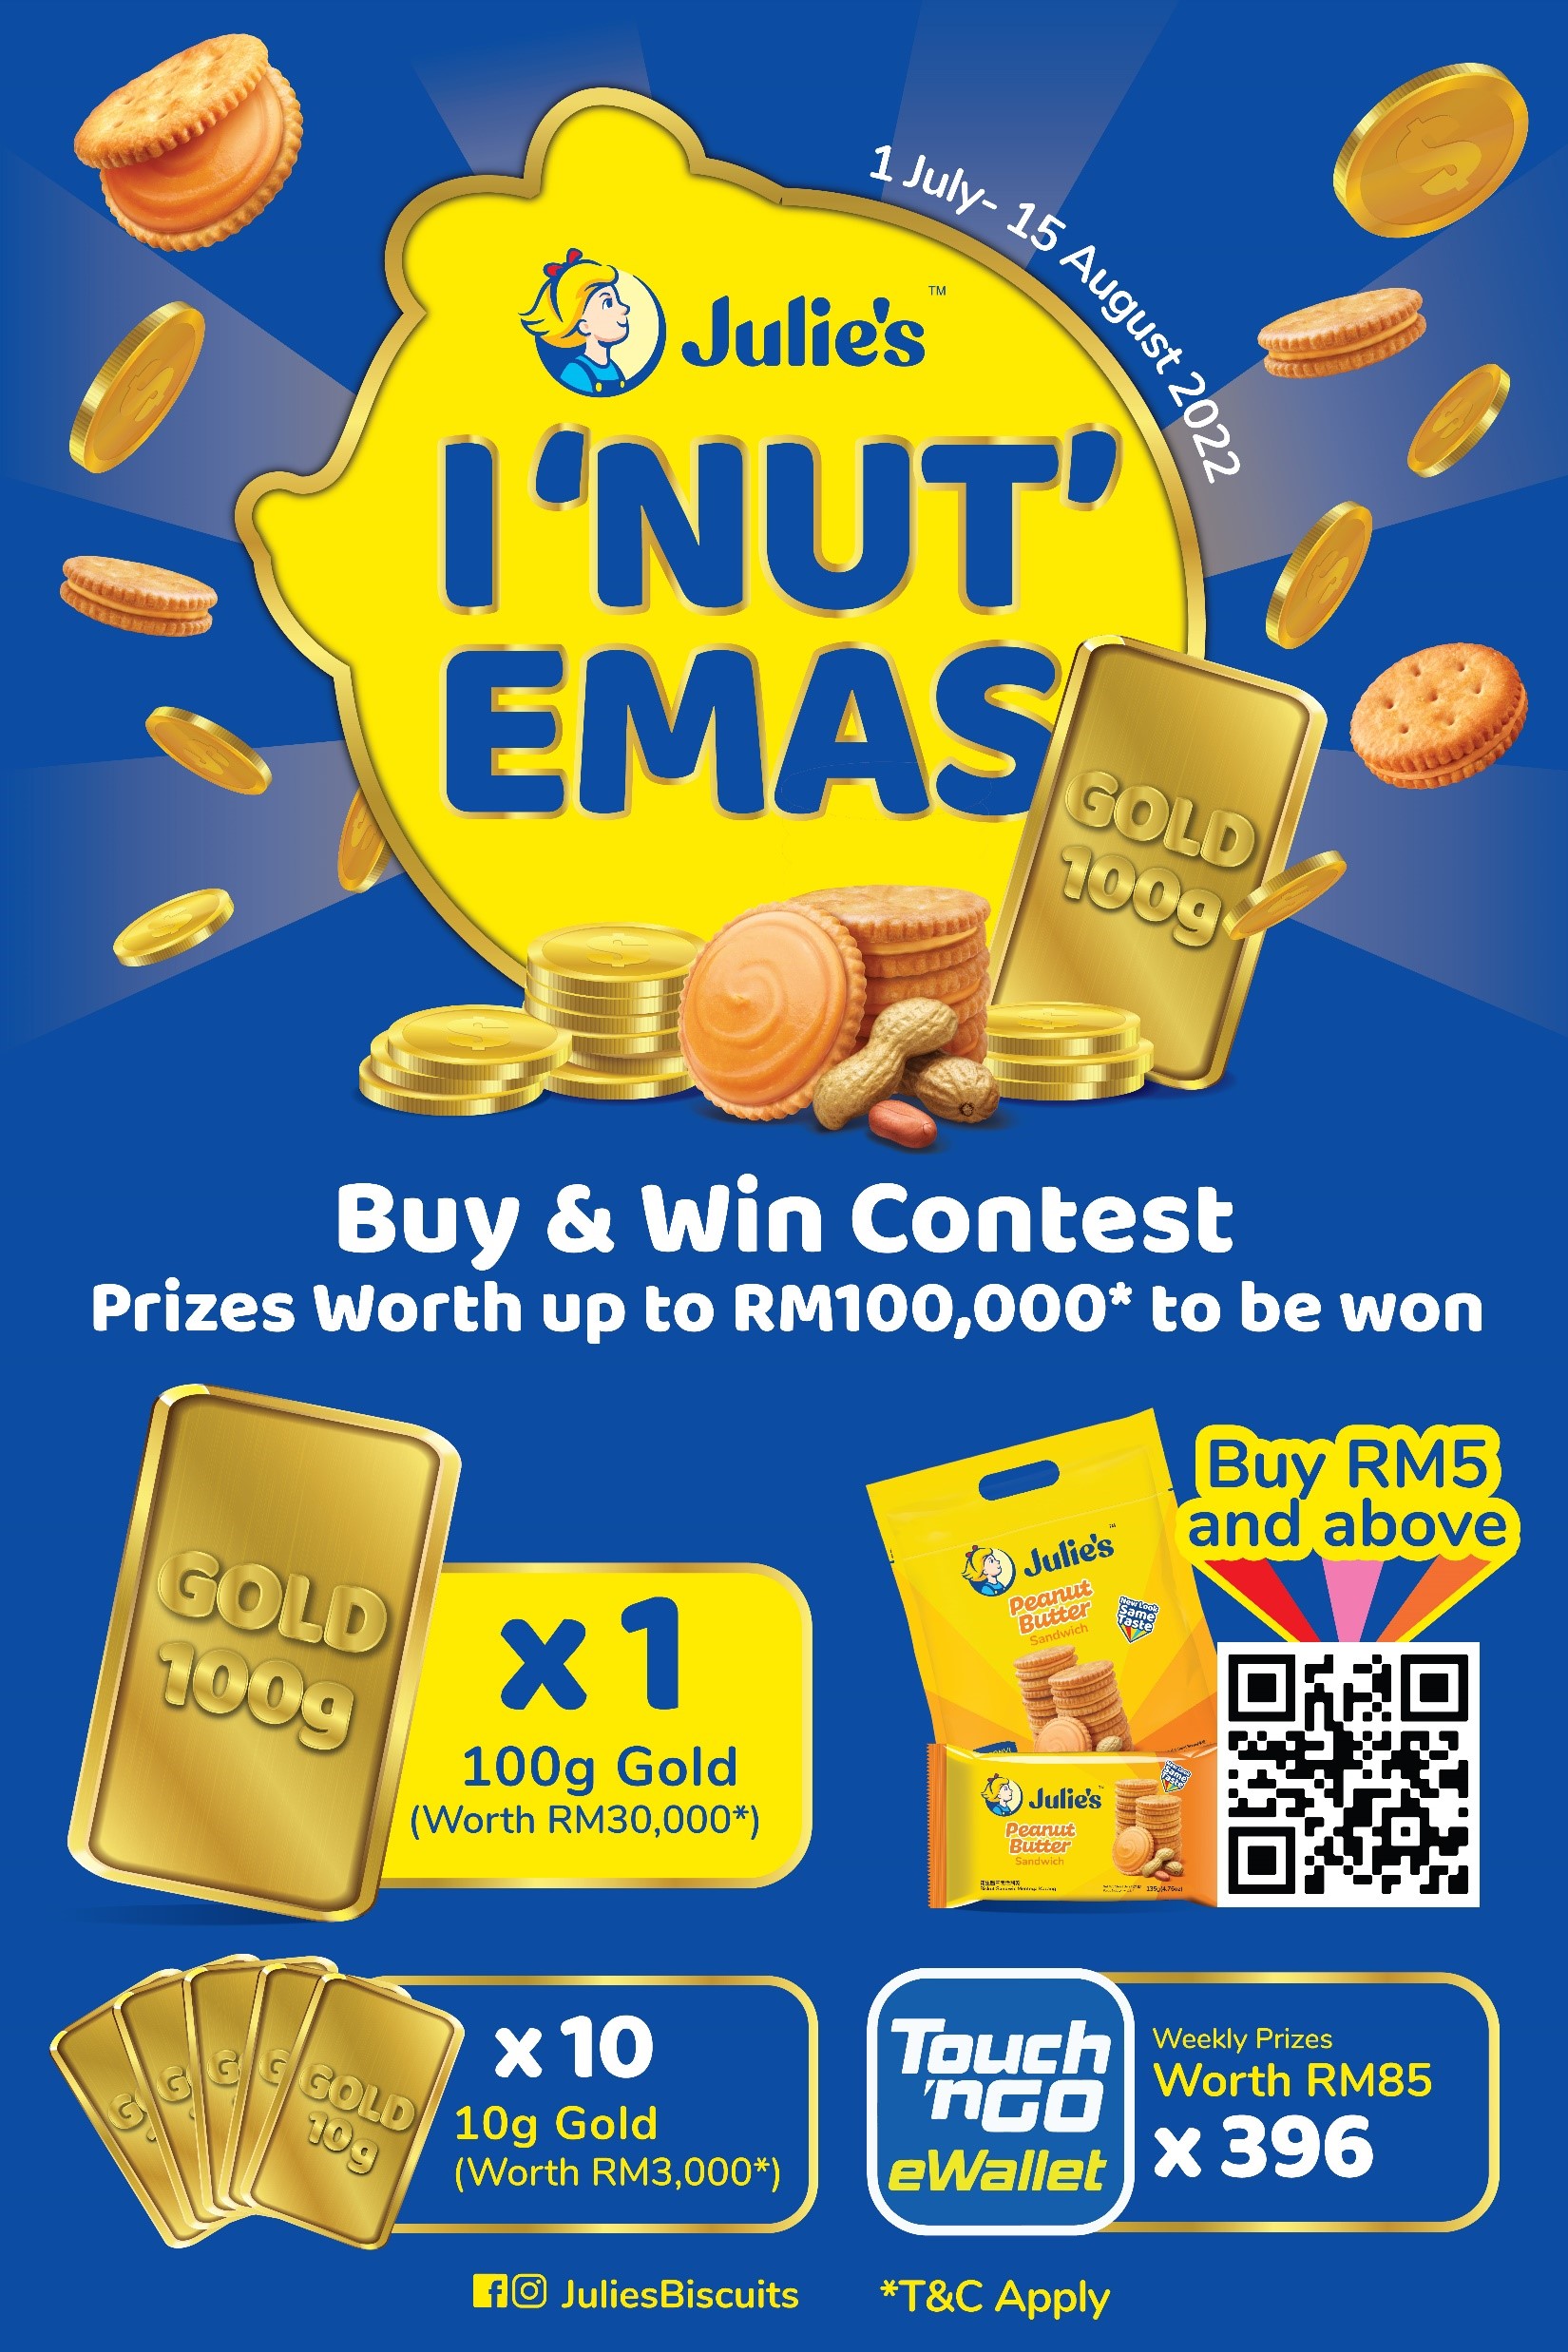 Nak Emas? Join Julie's 'I NUT EMAS' Contest and stand a chance to win 100g  Gold & Prizes worth RM100,000 in total!